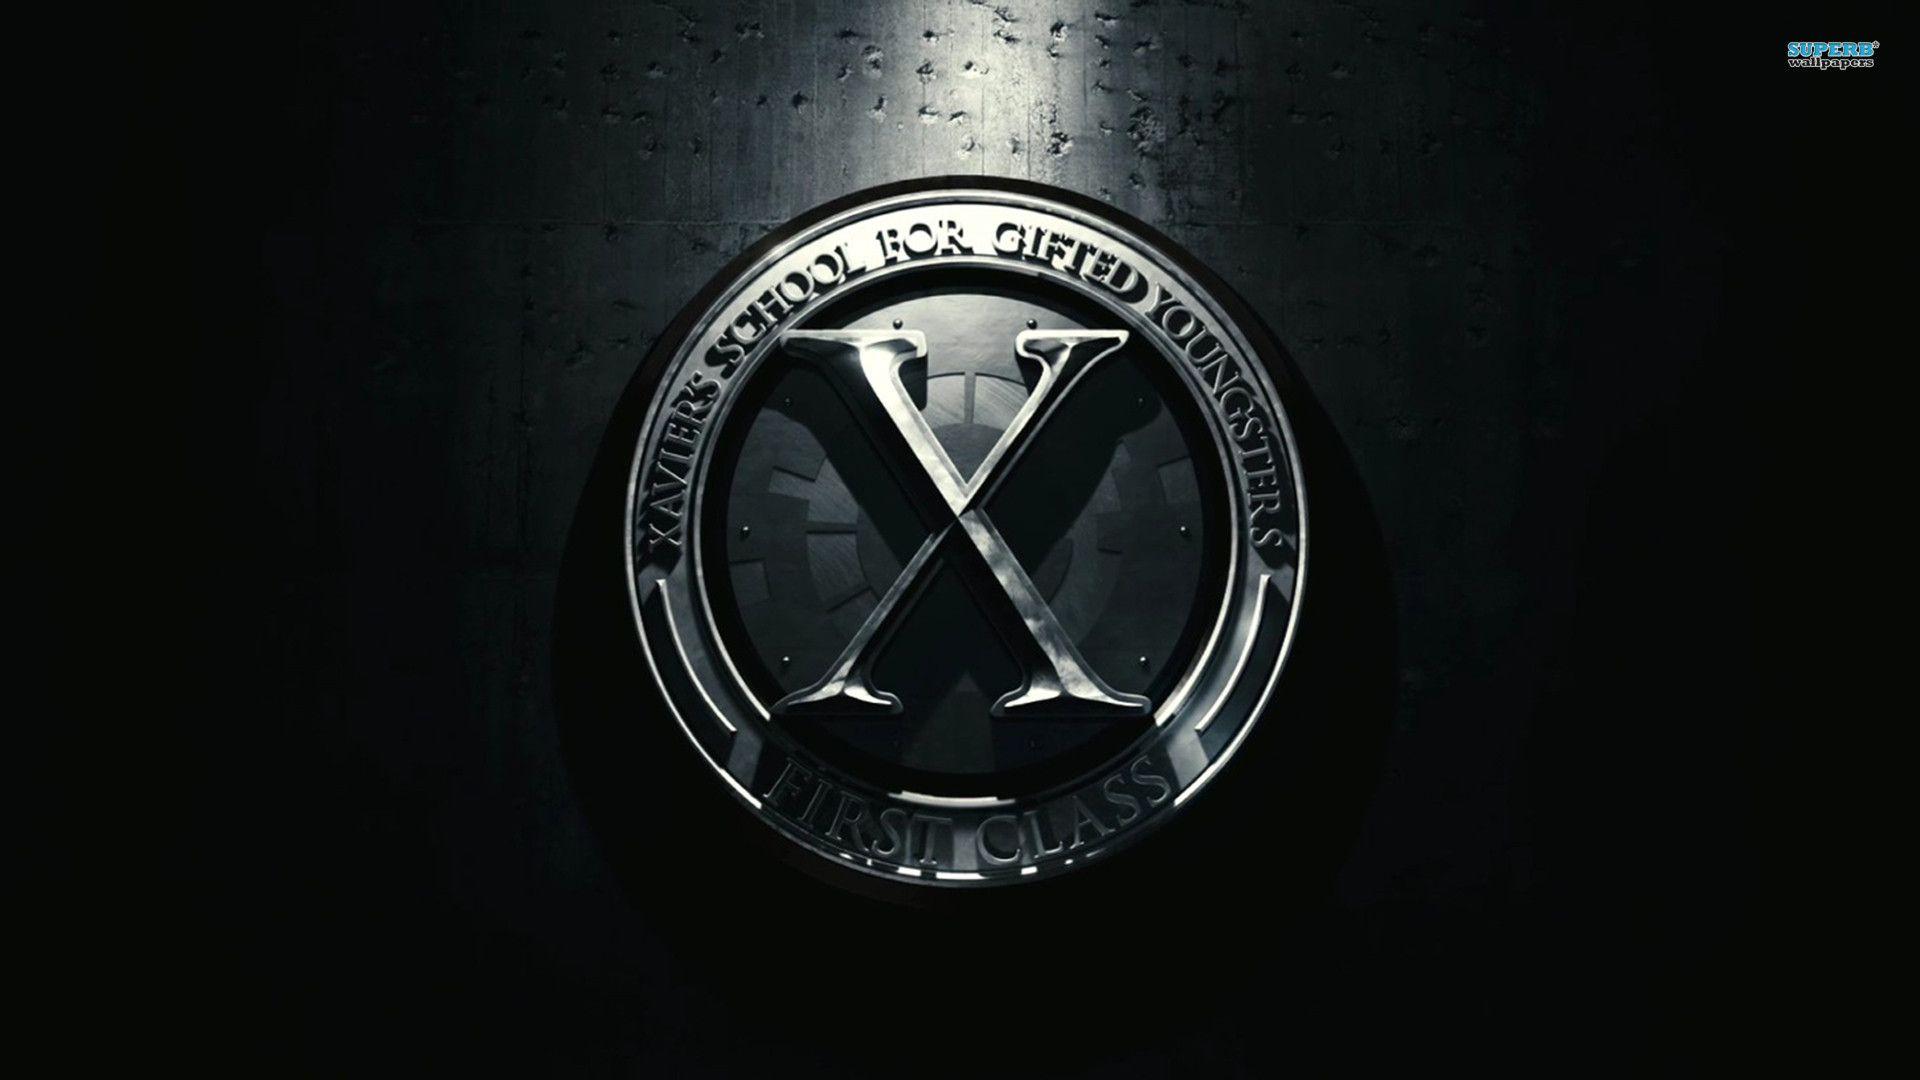 XMen Days of Future Past Character Wallpapers and Movie Posters